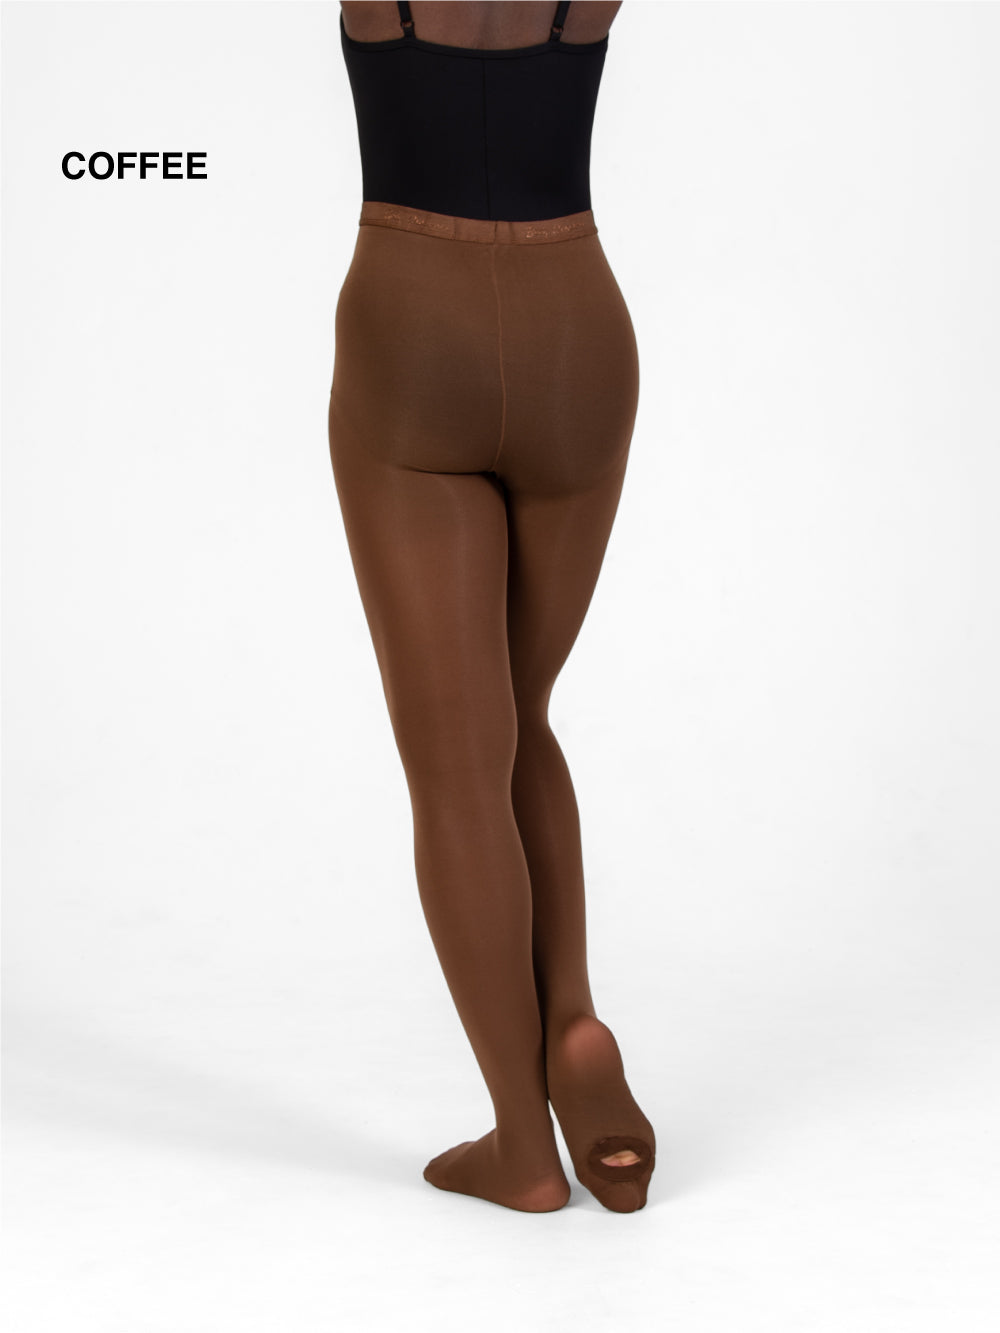 Body Wrappers Women's Total Stretch Seamless Convertible Tights